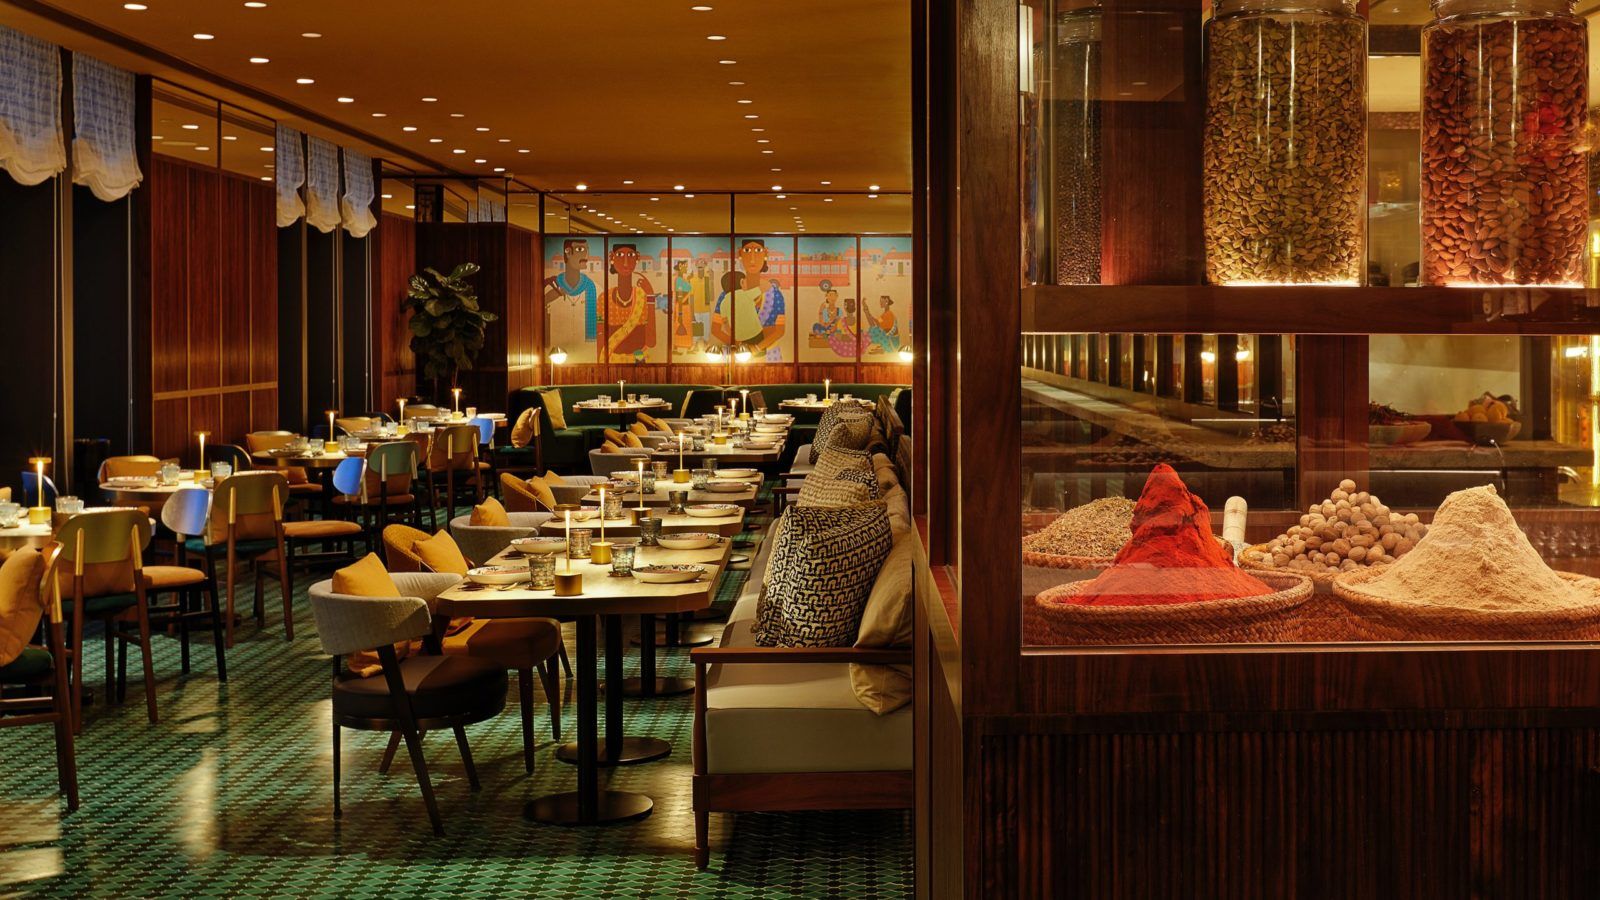 Chaat soft opens this month at Rosewood Hong Kong: here’s what to expect